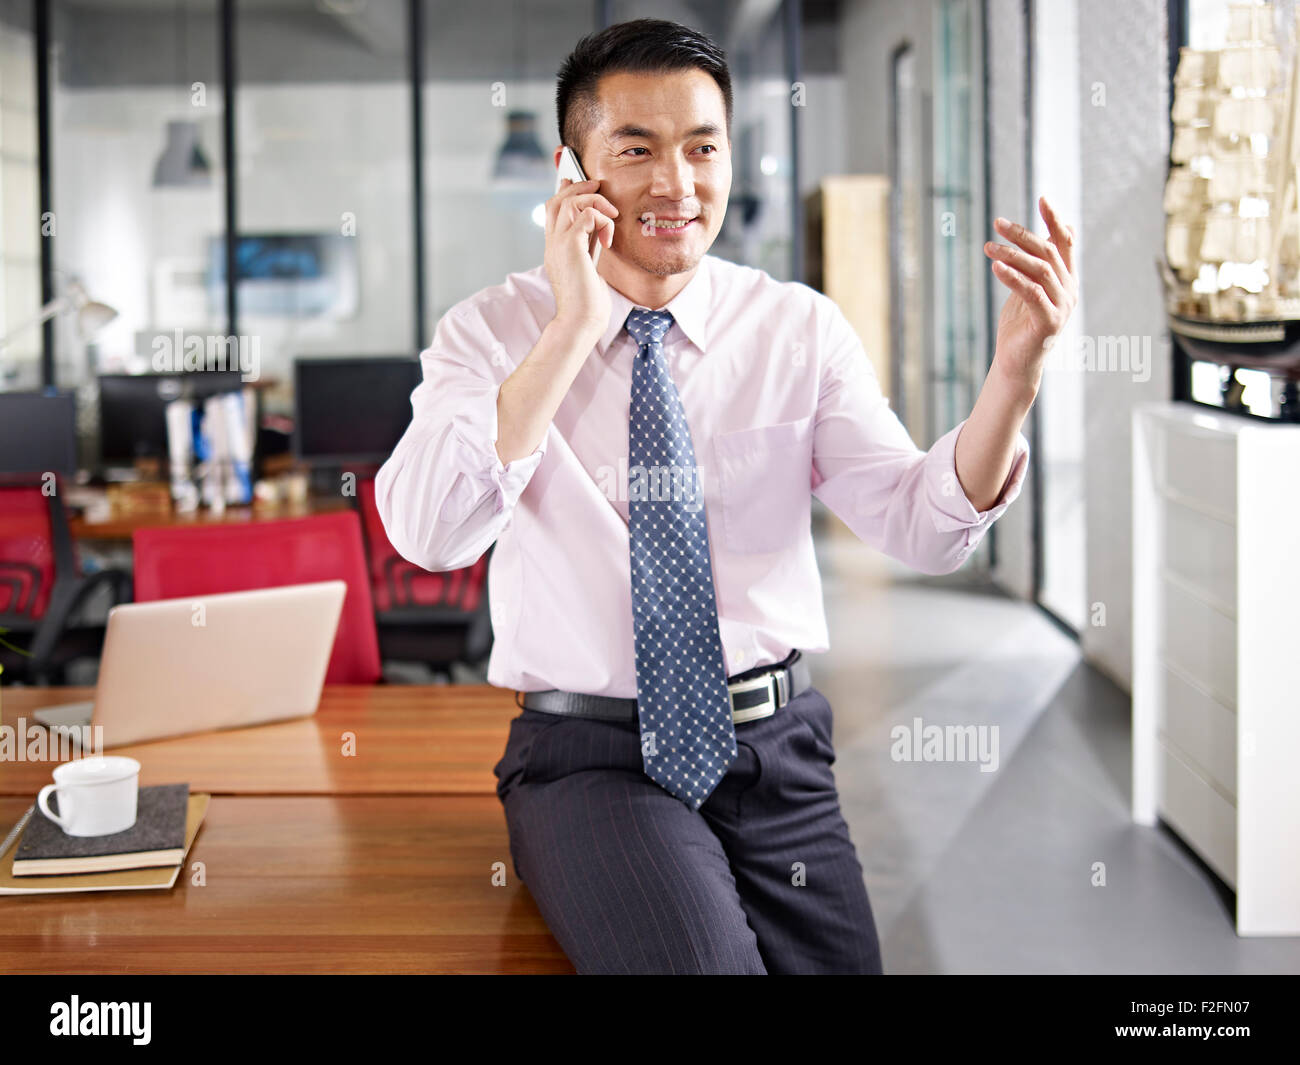 asian business executive talking on cellphone Stock Photo